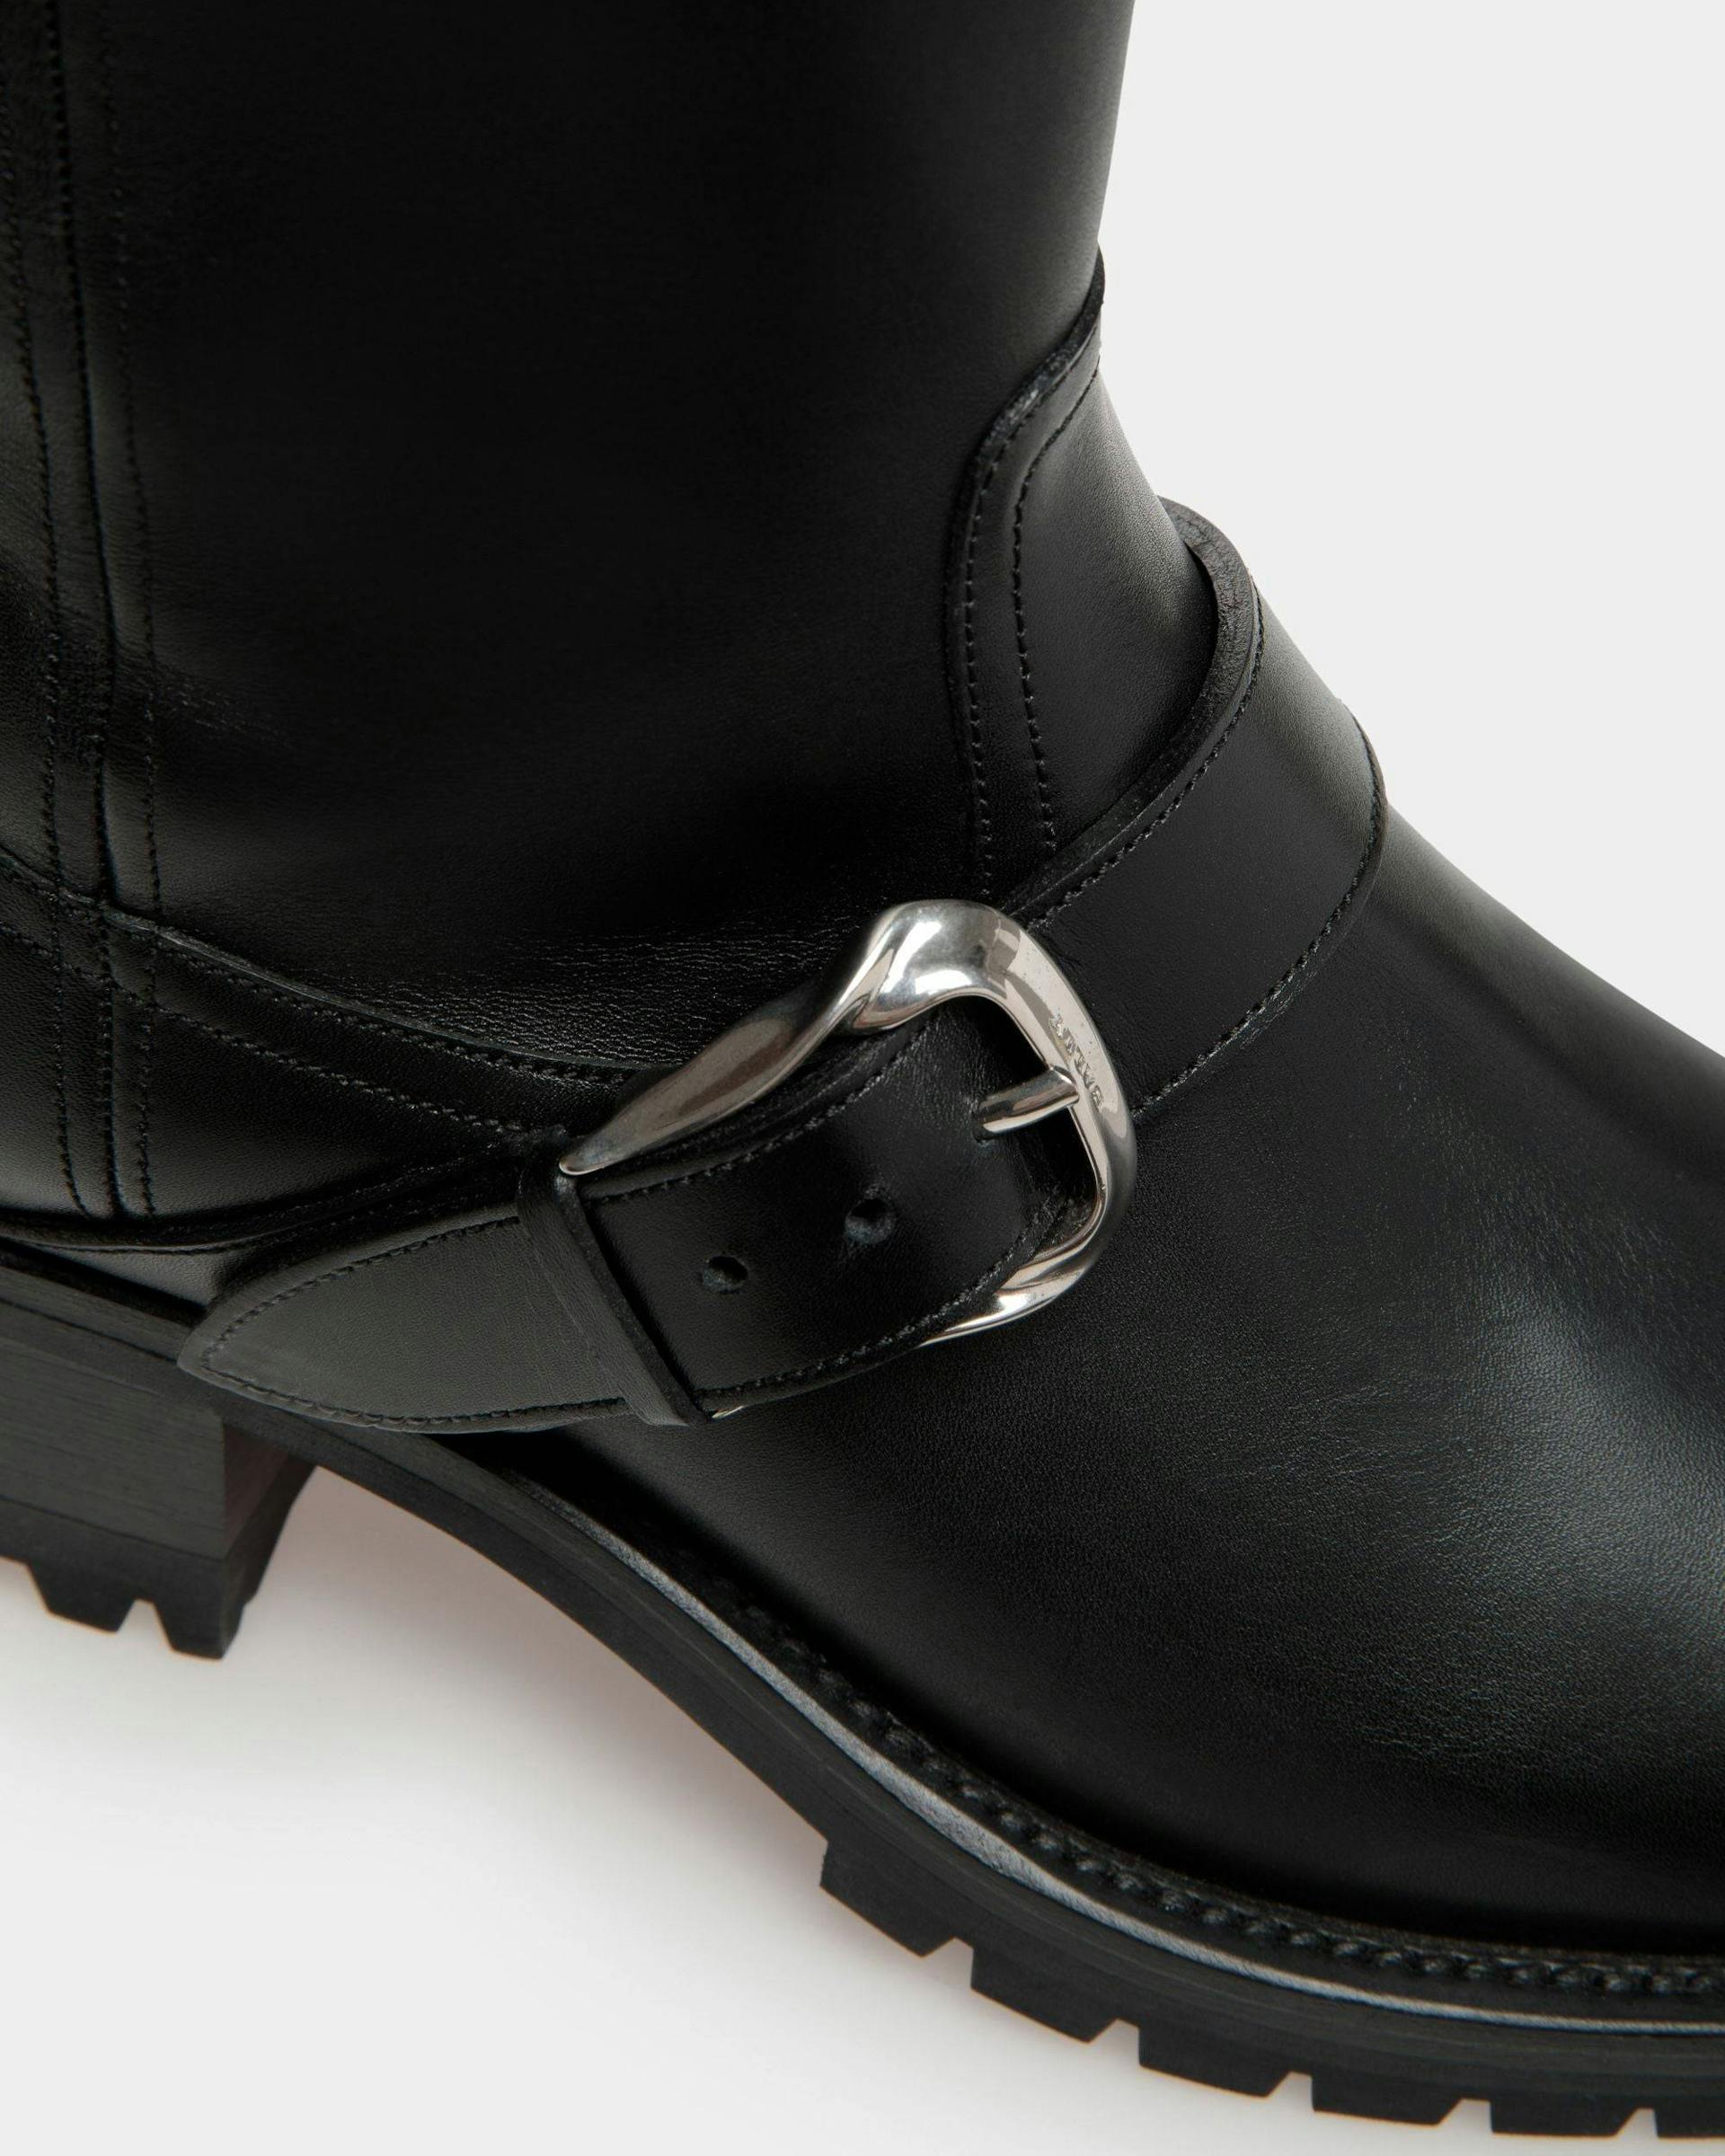 Men's Ardis Long Boots In Black Leather | Bally | Still Life Detail